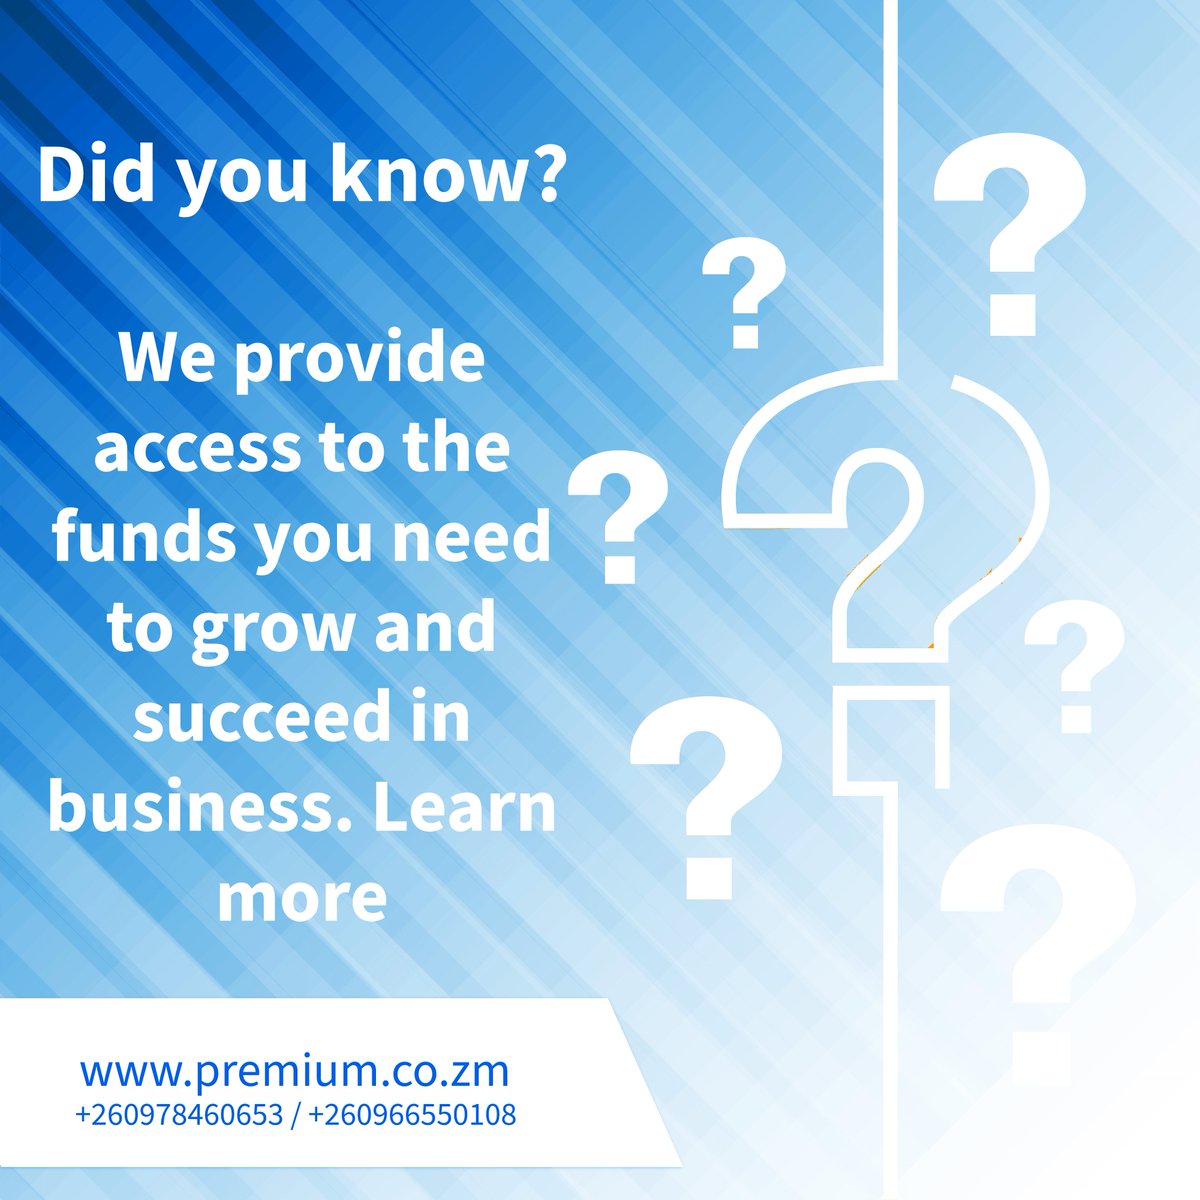 Did you know?
We provide access to the funds you need to grow and succeed in business. Learn more
#premiumfinance #FinancialEducation